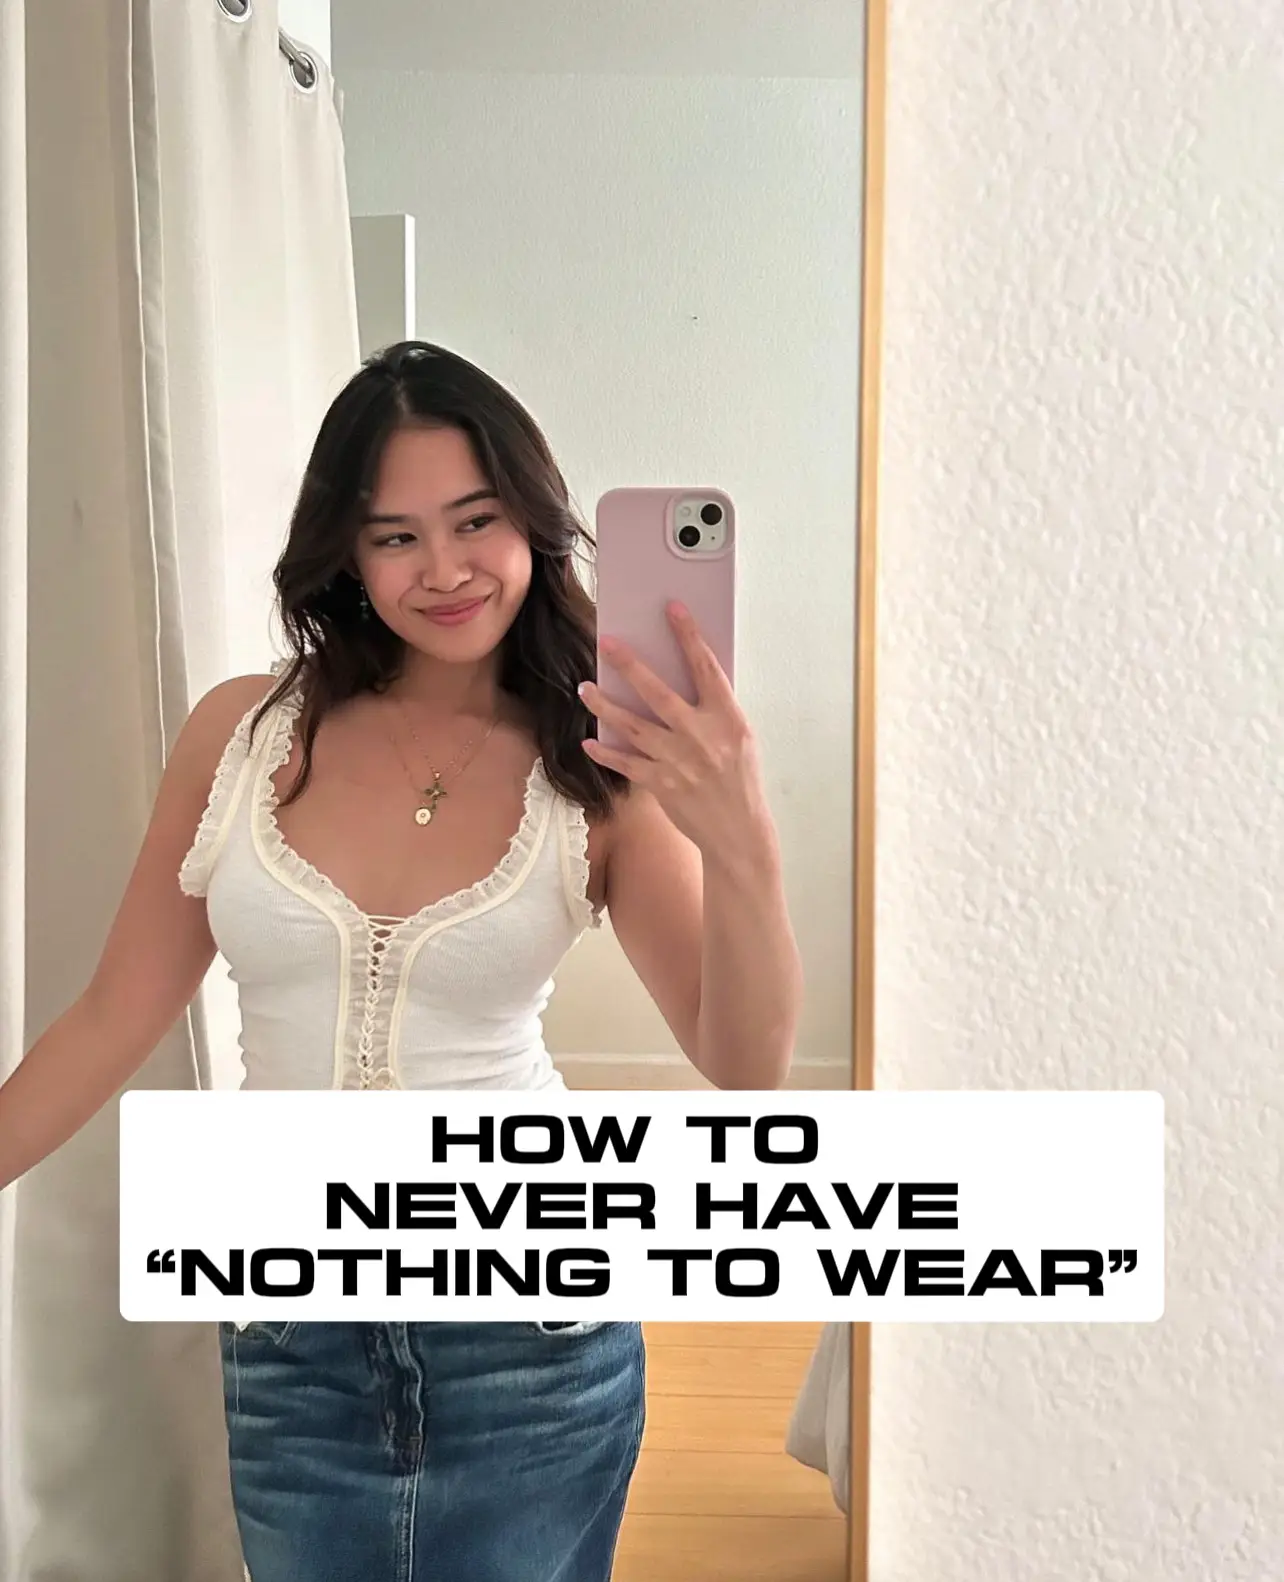 How to never have “nothing to wear”